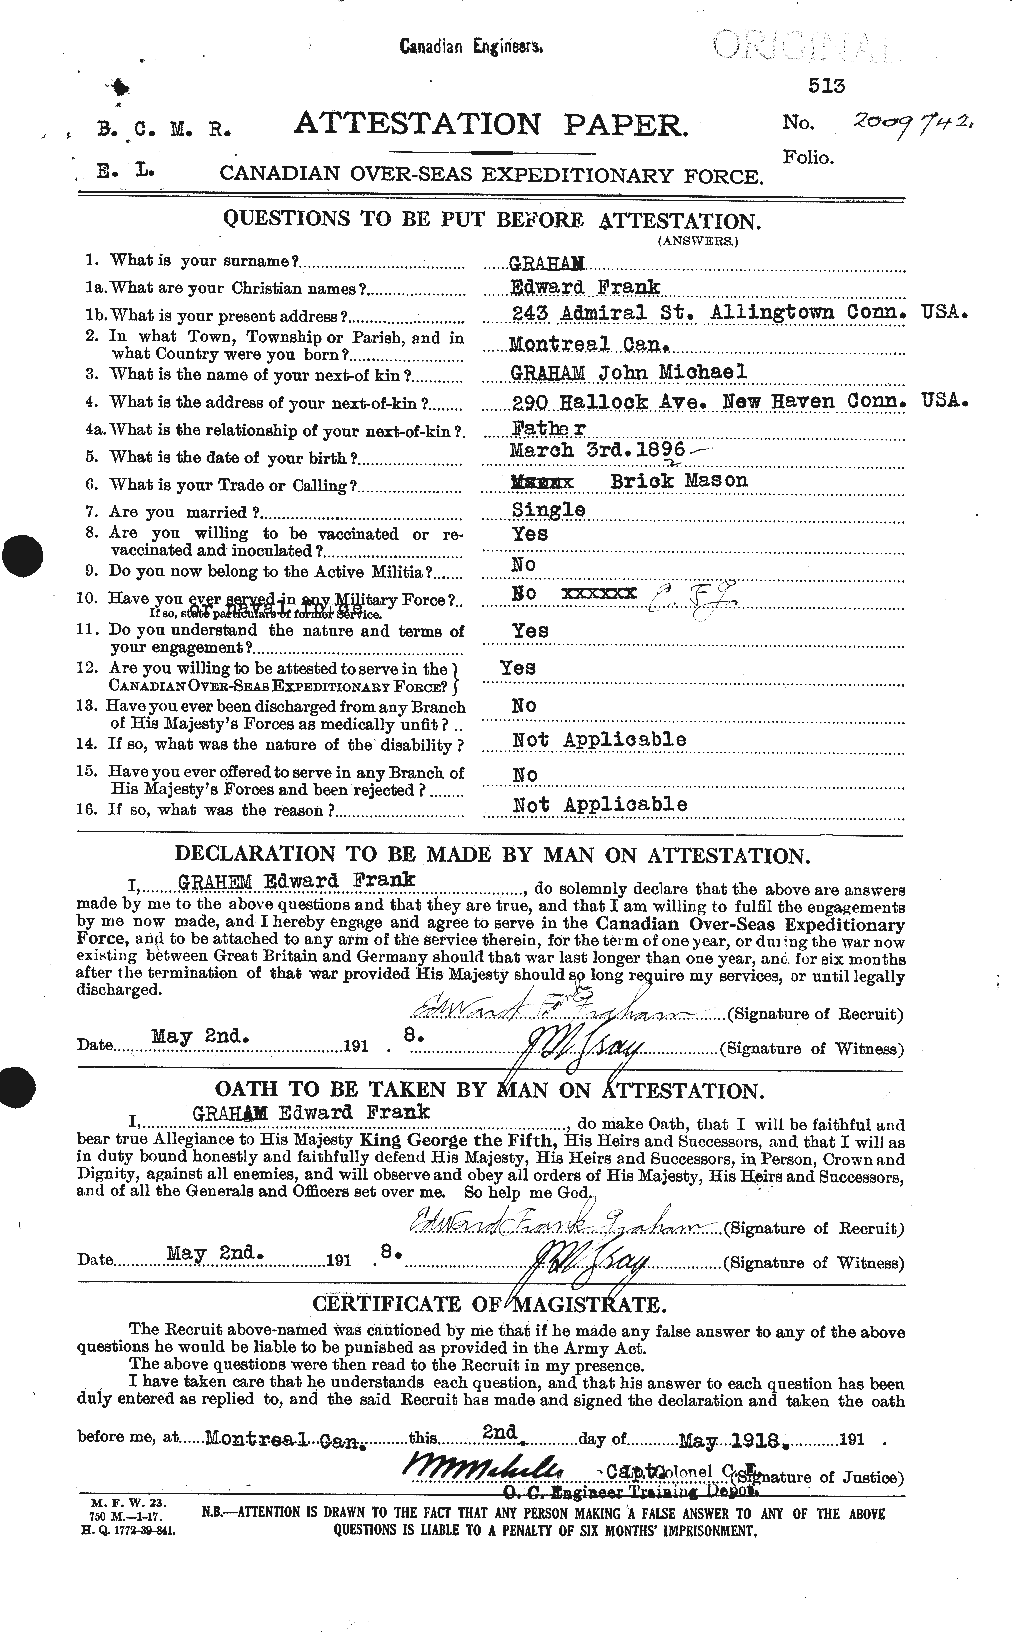 Personnel Records of the First World War - CEF 353868a